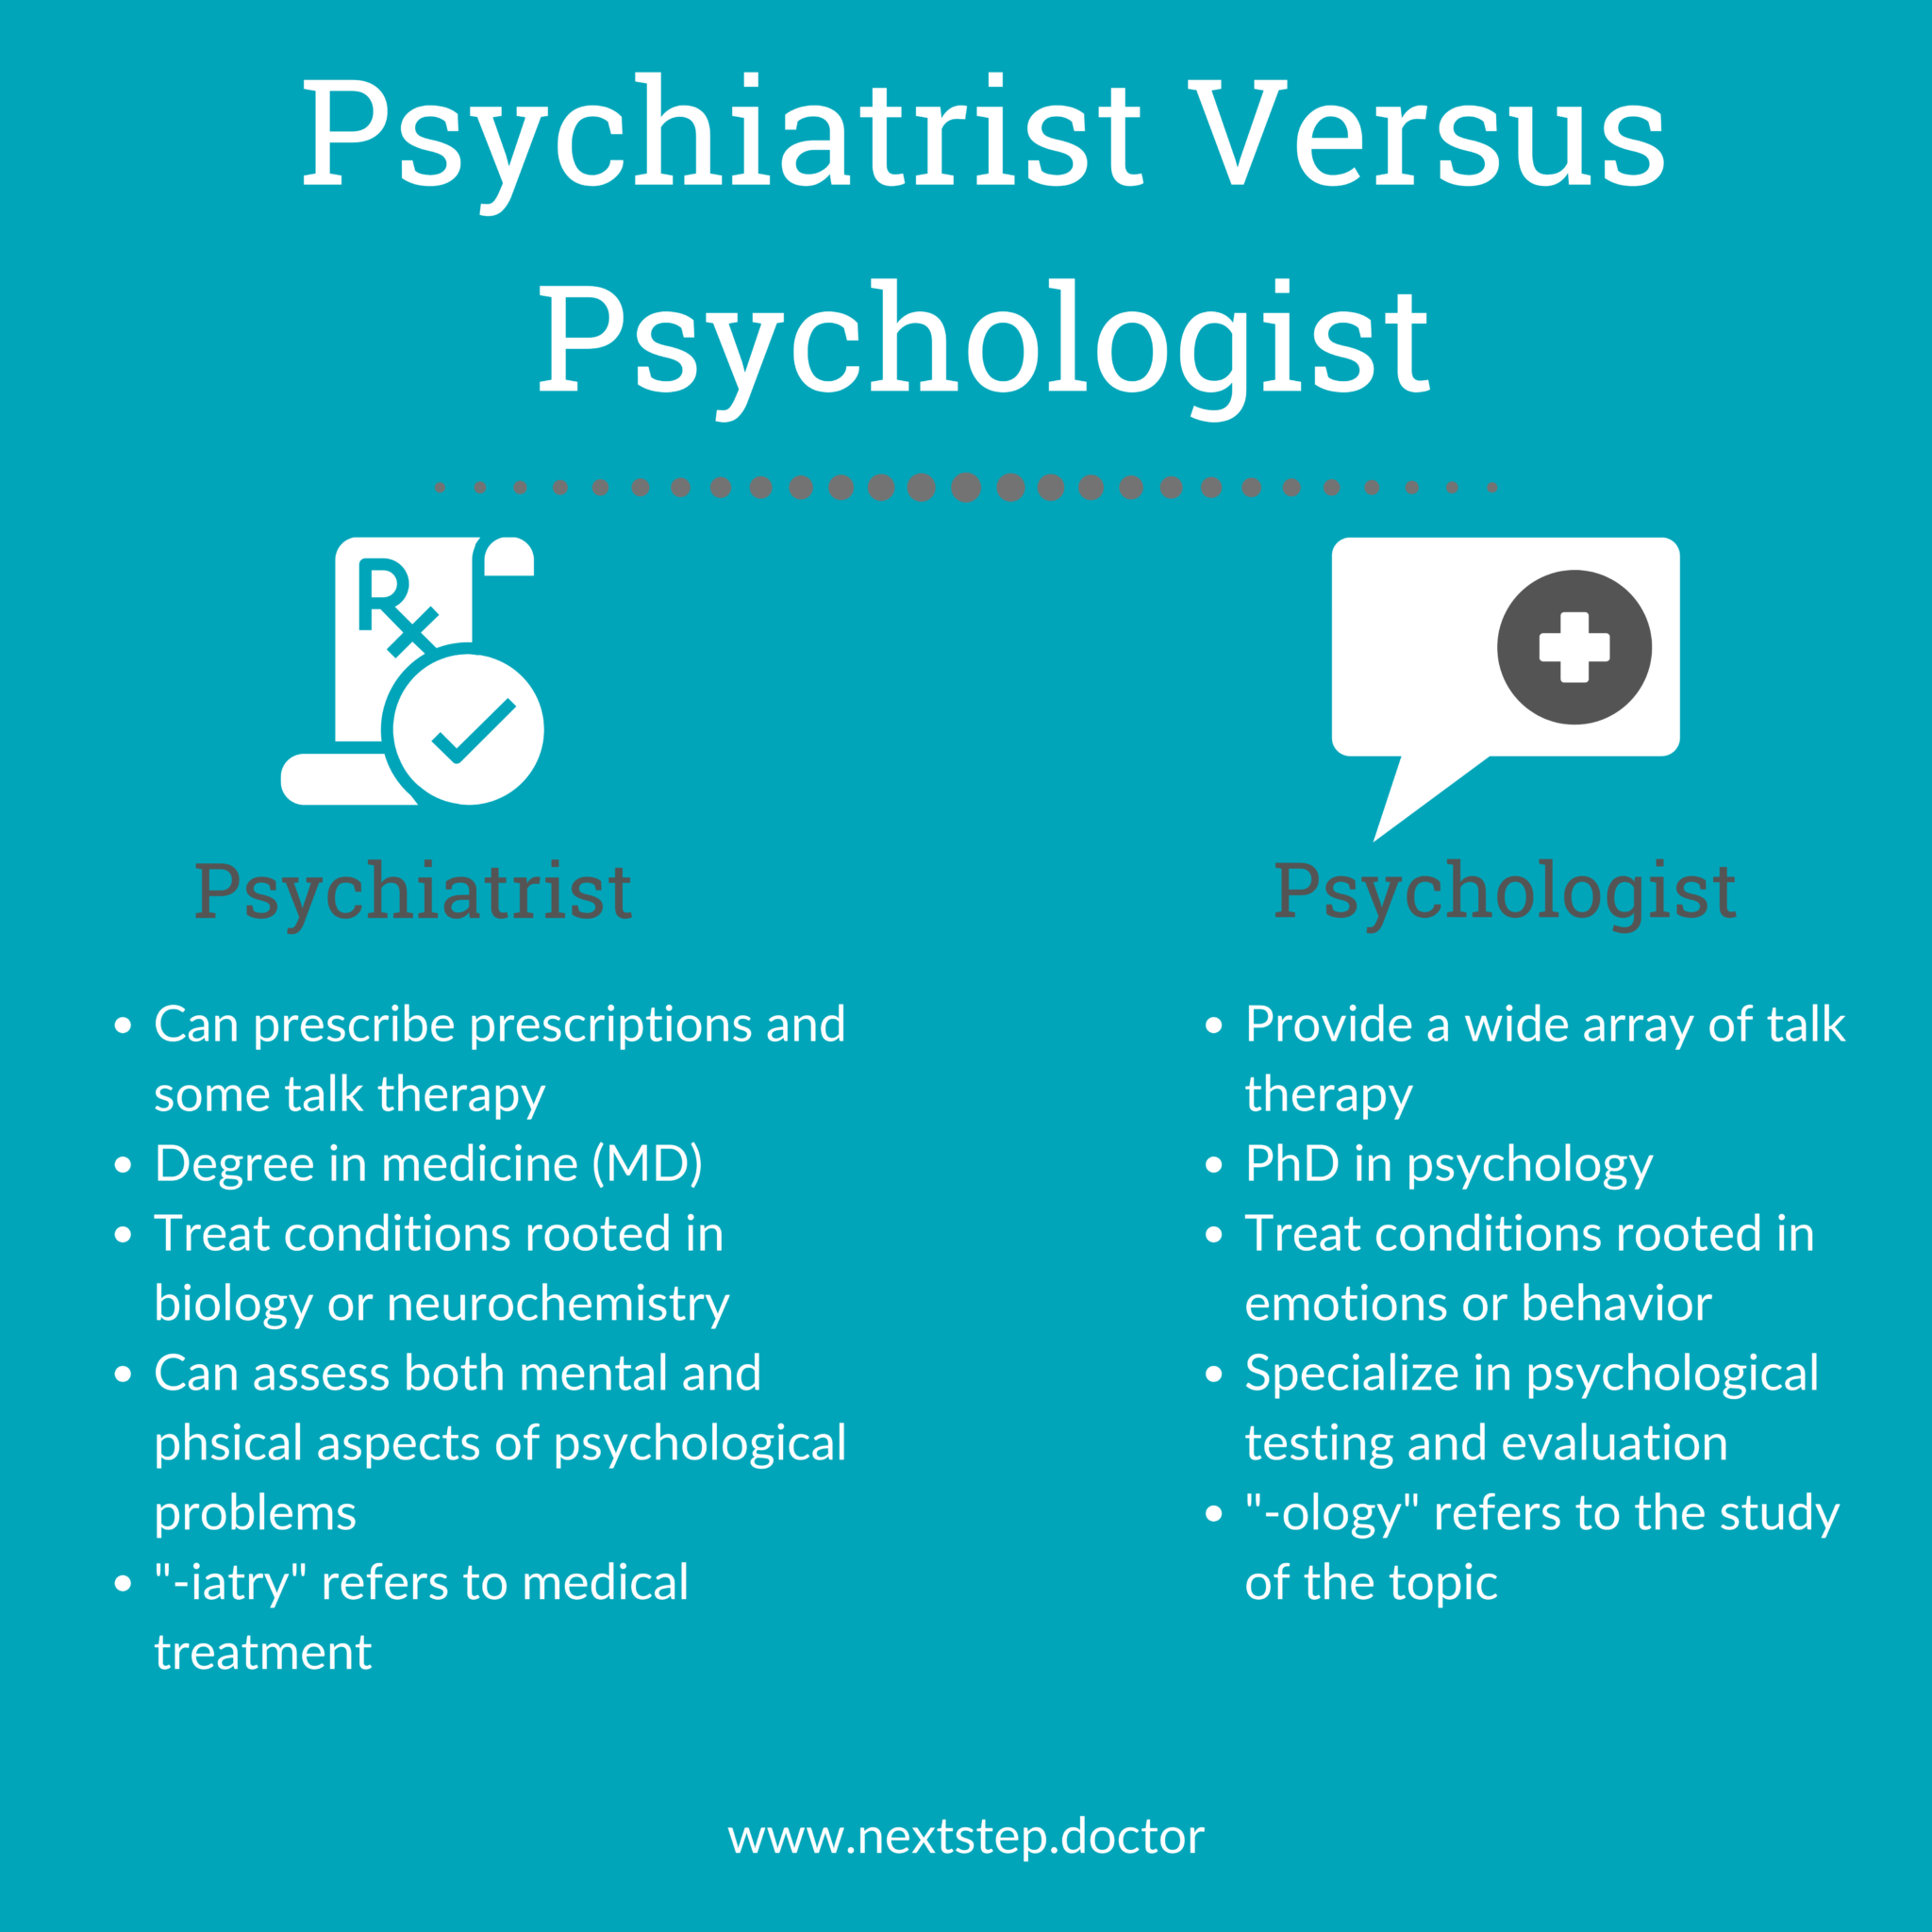 What Is The Difference Between Psychiatrists And Psychologists Next Step 2 Mental Health 2542